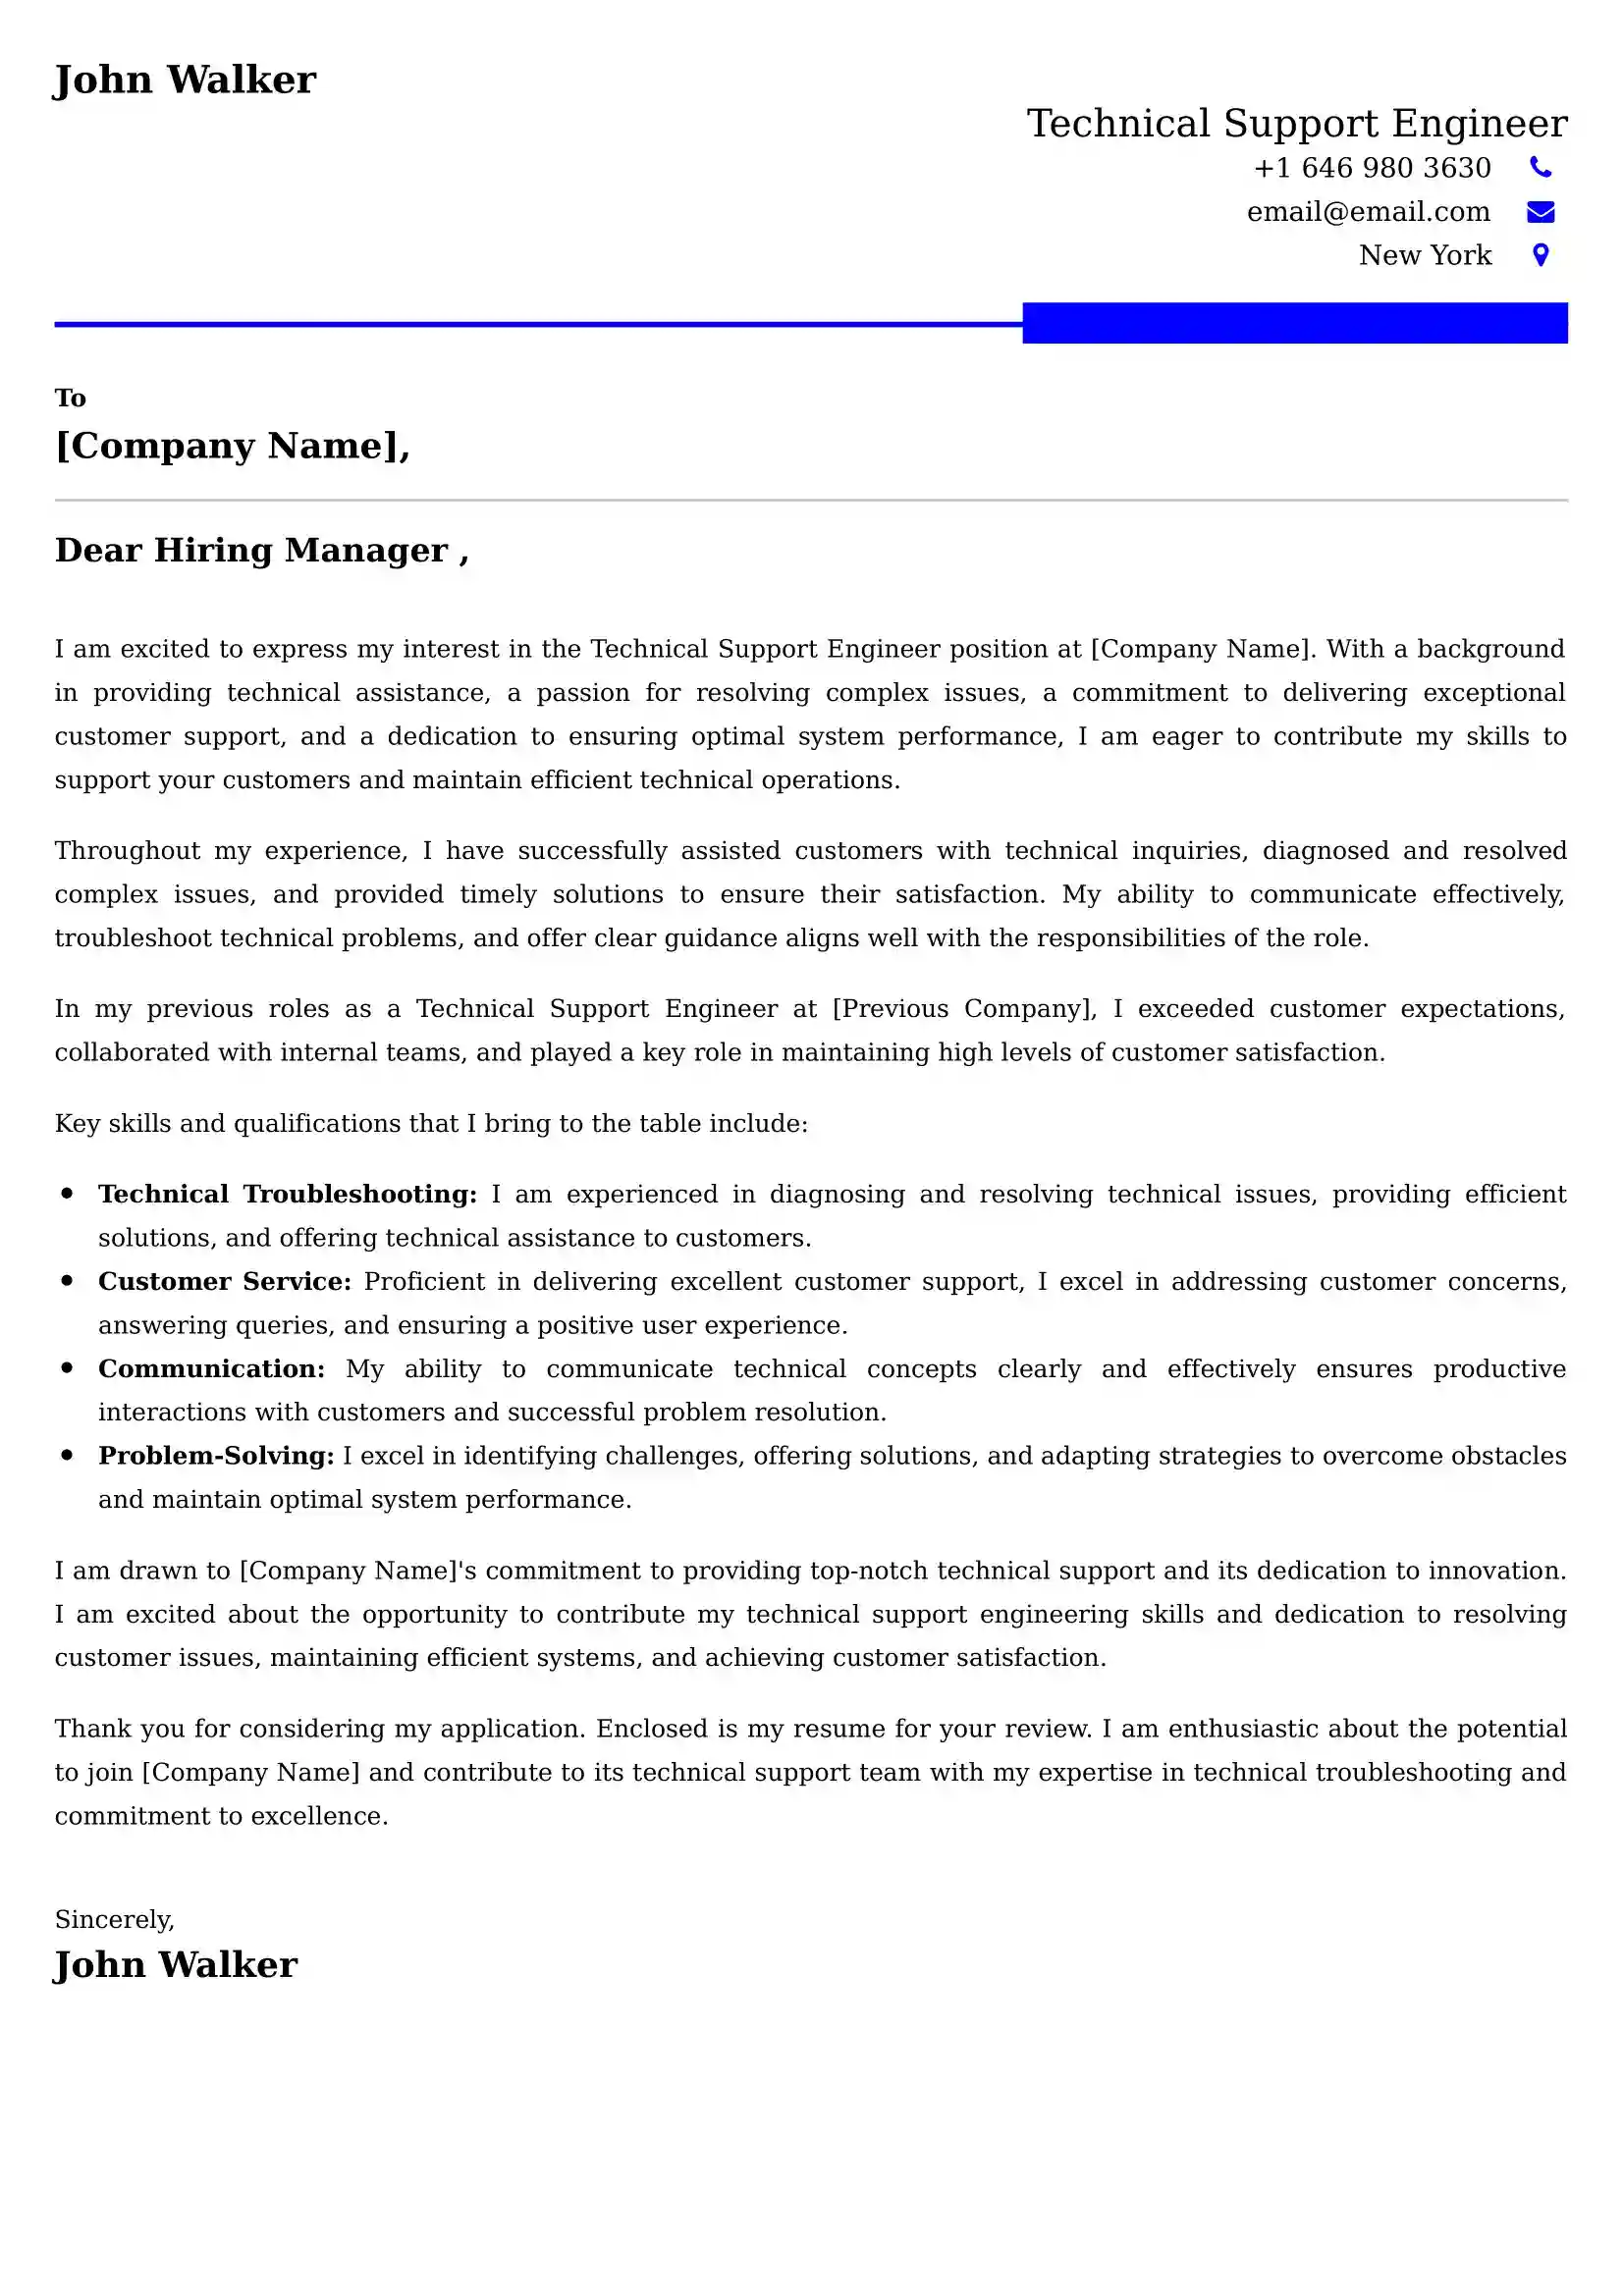 Technical Support Engineer Cover Letter Sample